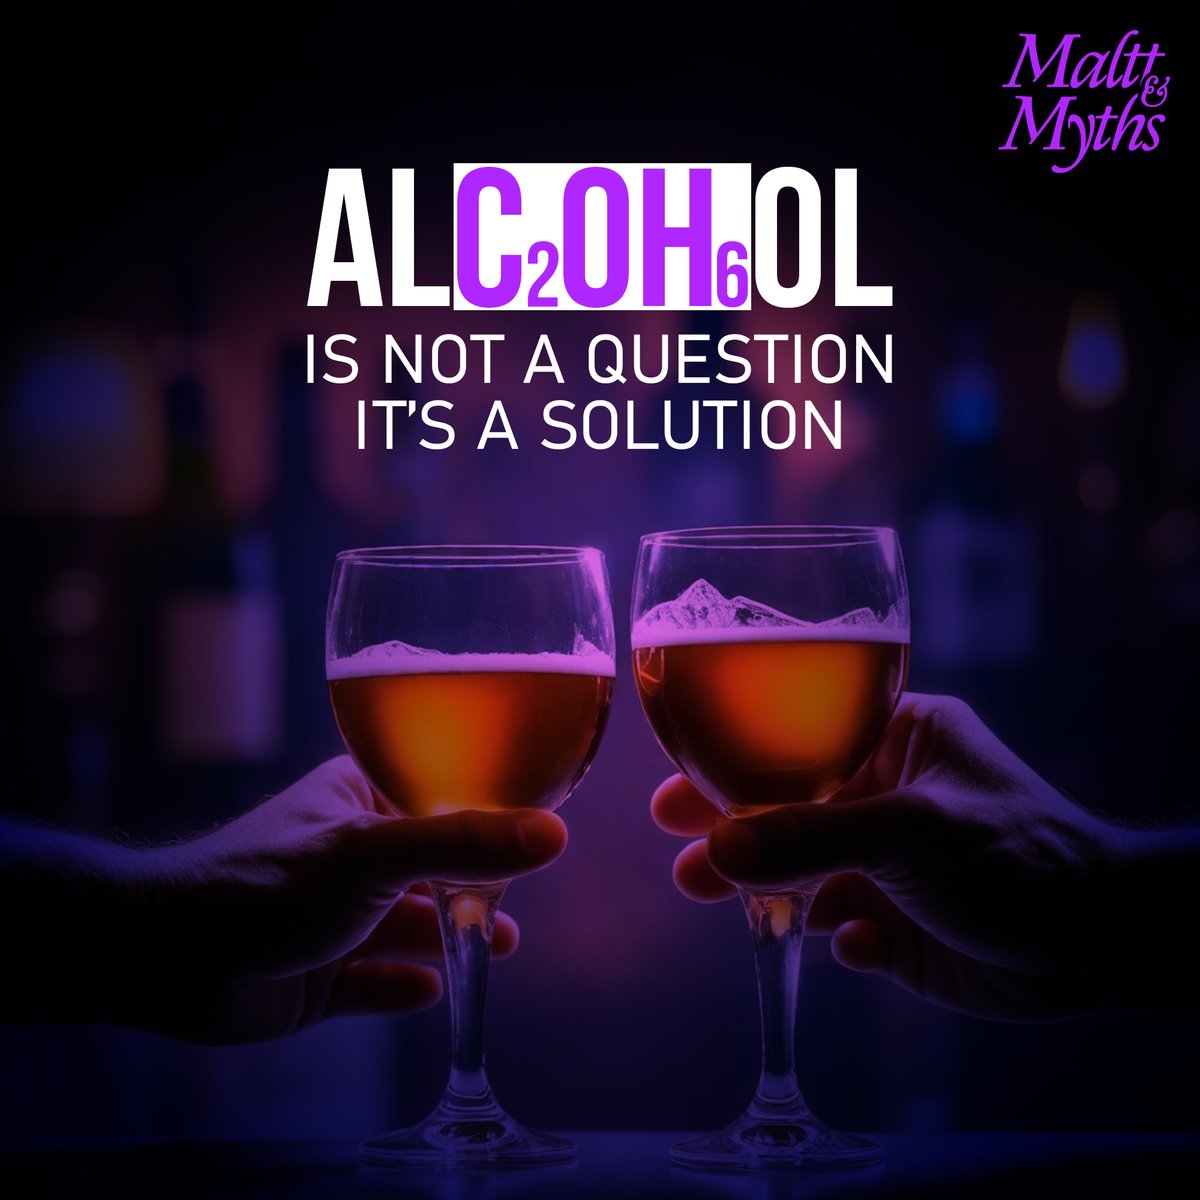 Sometimes, in life’s complexities, a sip can offer solace, a fleeting escape from worries.
.
.
.
#malttnmyths #cheerstonewbeginnings #publife #RoyalExperience #ElegantEvenings #SophisticatedSips #PremiumPubs #ExclusiveVenue #noida #noidadiaries #comingsoon #comingsoon2024